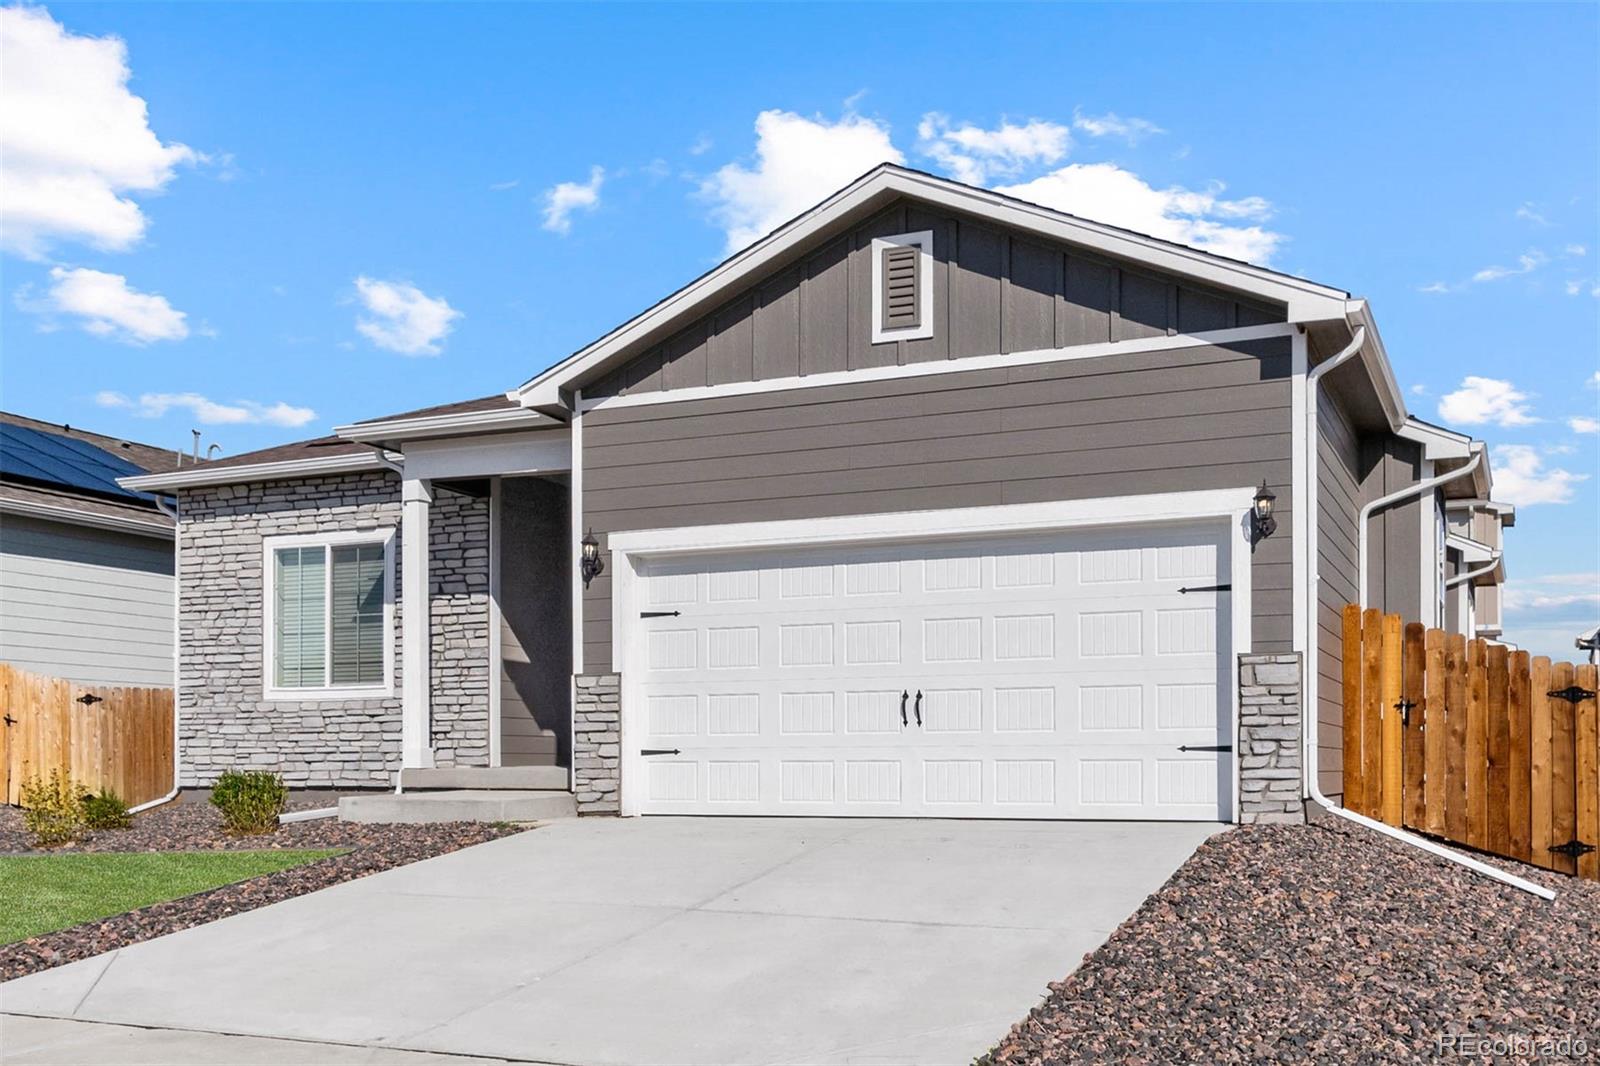 Report Image for 817  Twining Ave ,Brighton, Colorado